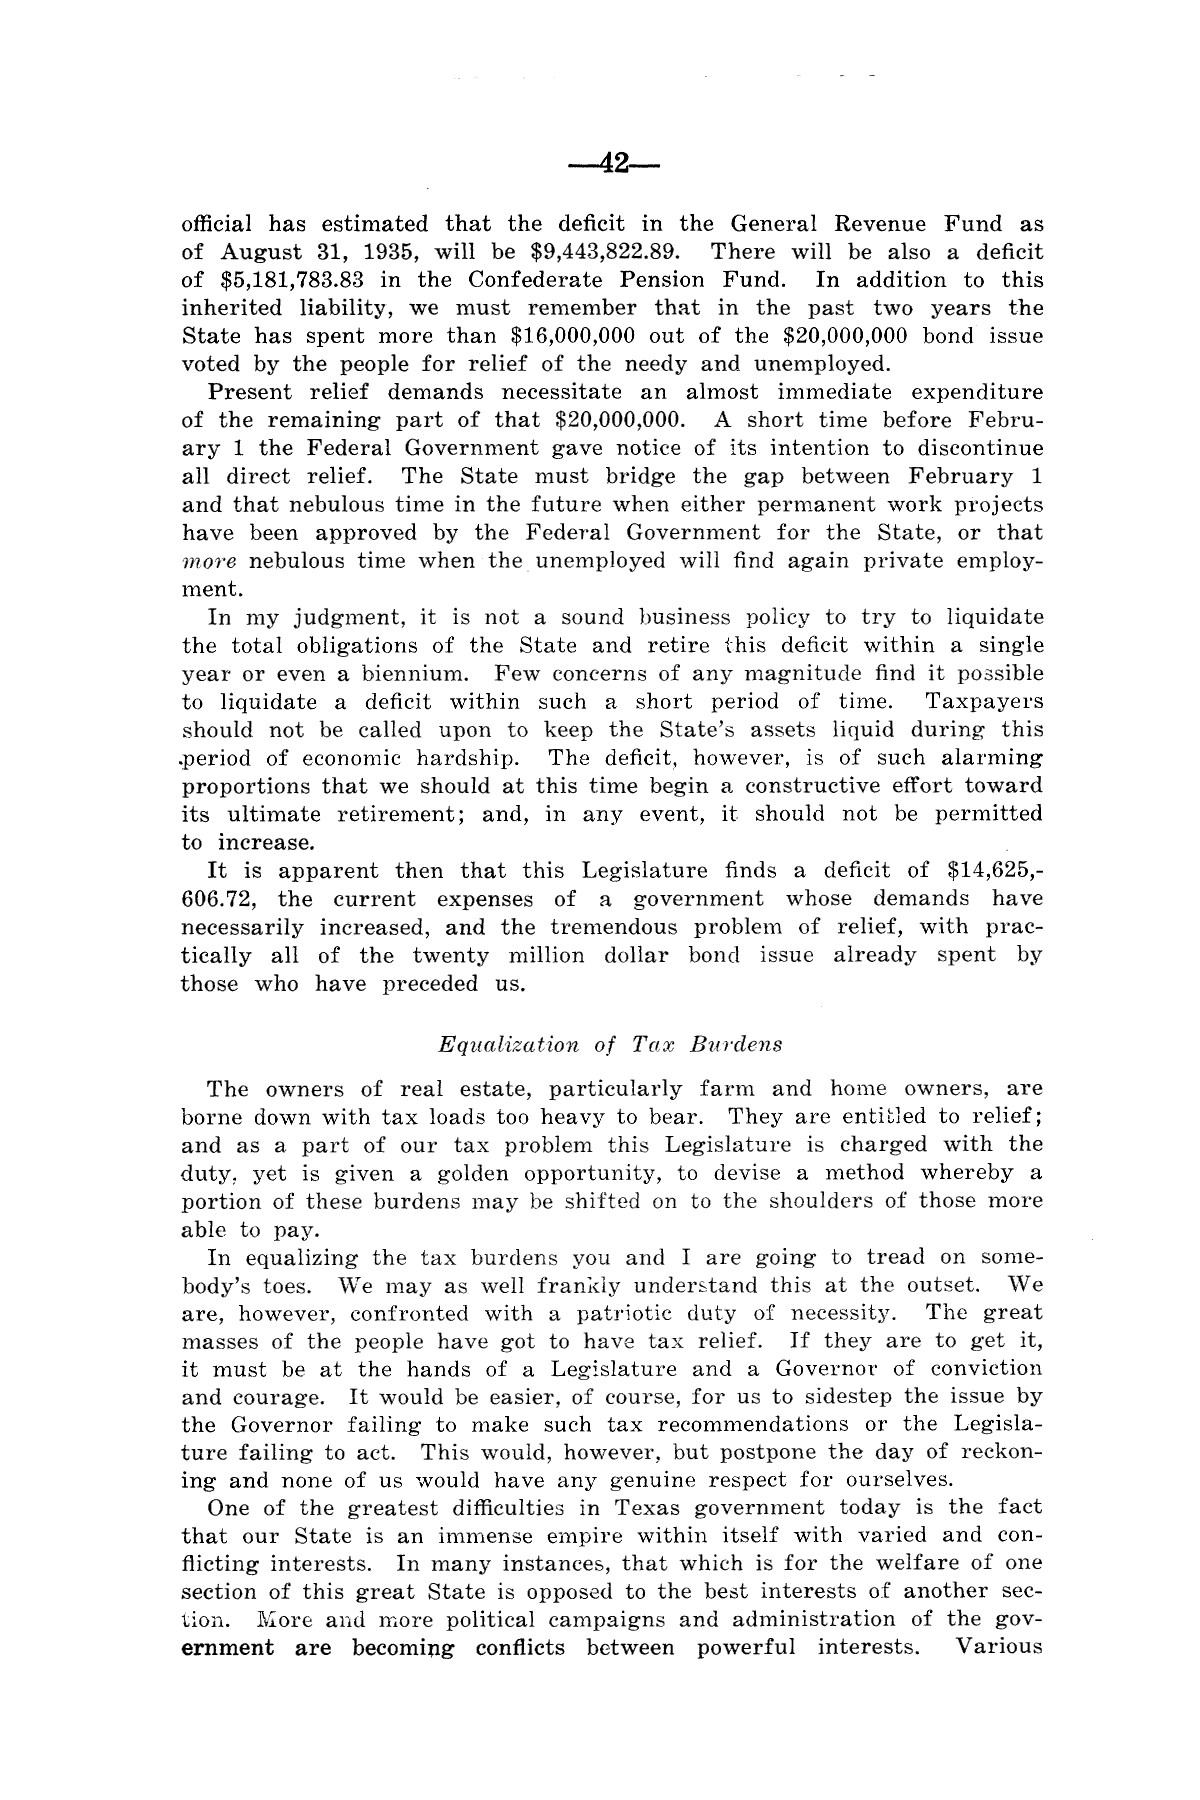 Legislative Messages of Hon. James V. Allred, Governor of Texas 1935-1939
                                                
                                                    [Sequence #]: 41 of 263
                                                